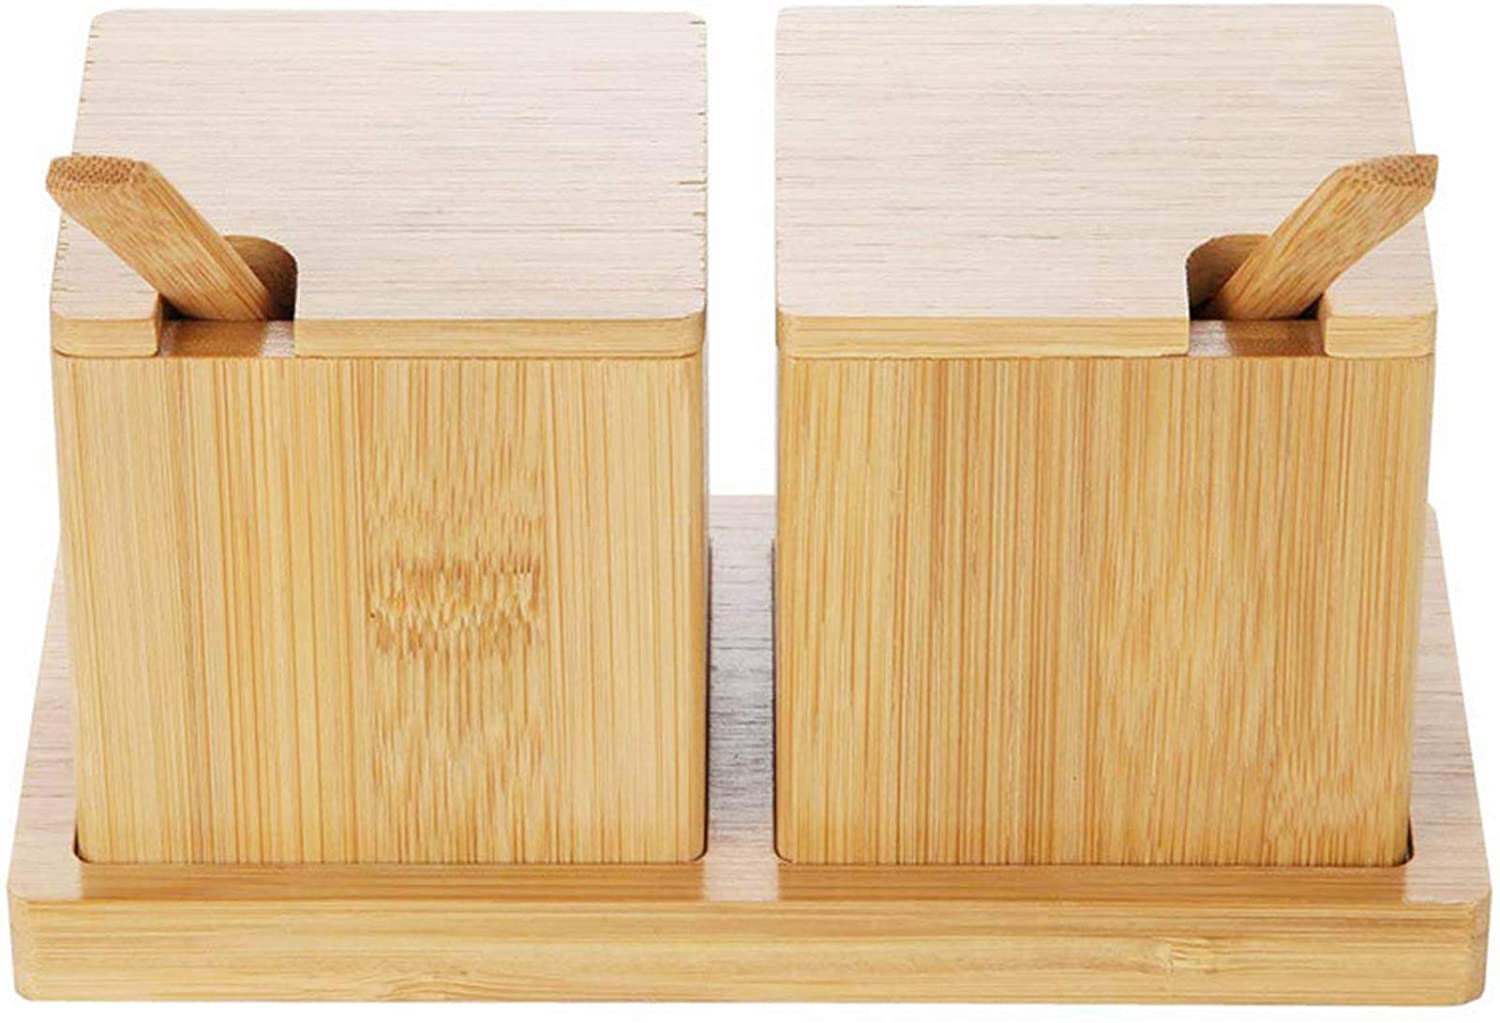 yarlung Set of 2 Bamboo Salt Boxes with Dippers and Tray Gourmet Seasoning Wooden Square Containers with Lids Spice Condiment Canisters for Kitchen Cooking Supplies 